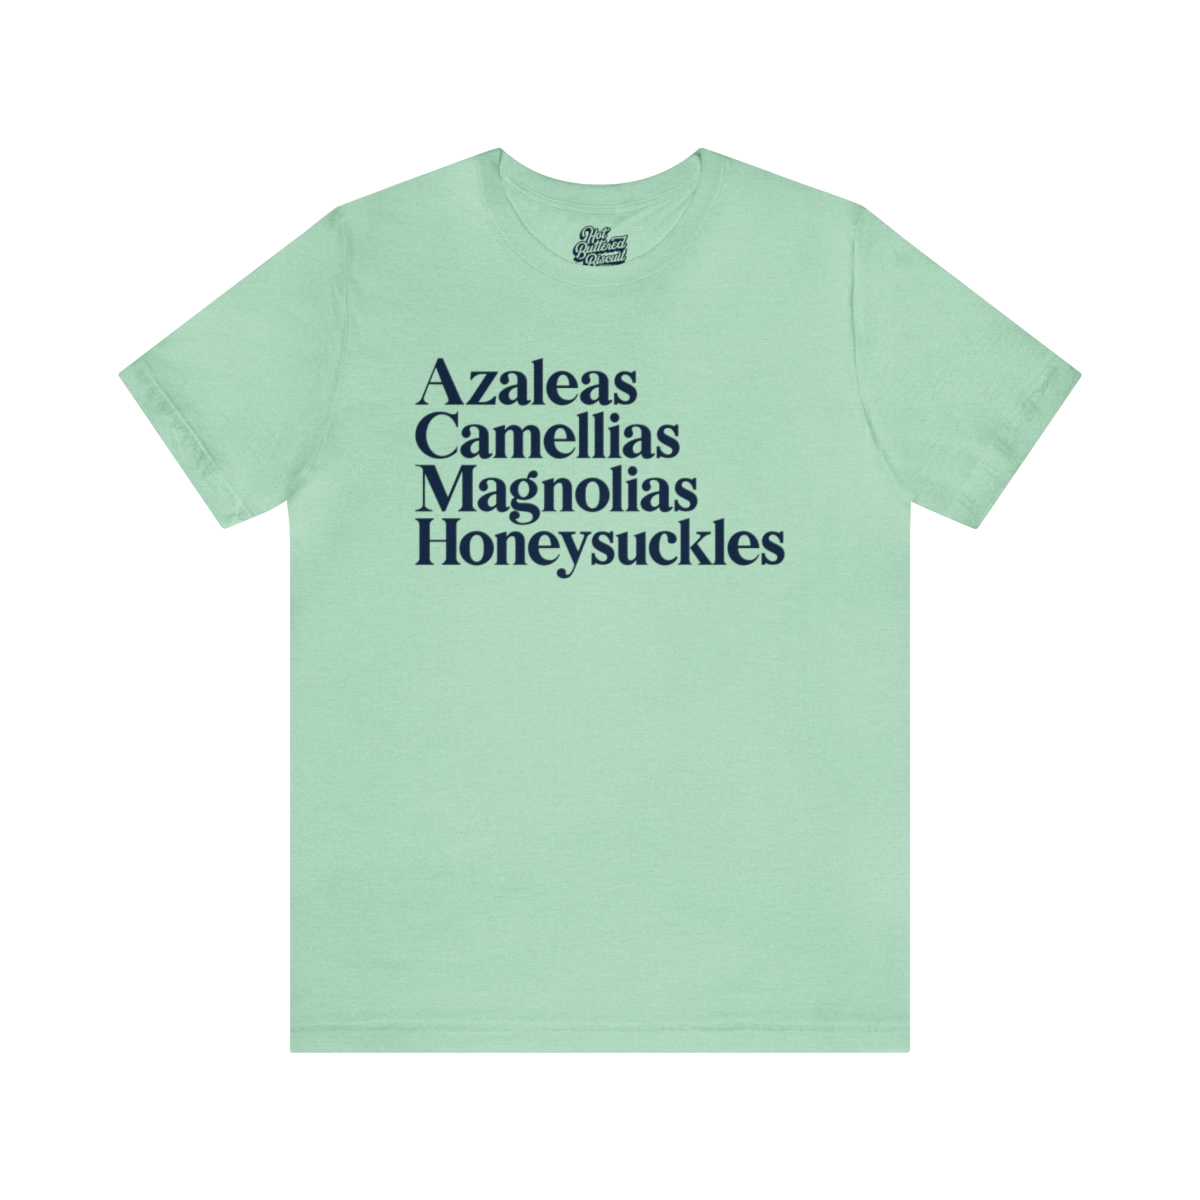 Introducing our “Southern Blossoms” t-shirt – We’ve picked the most iconic blooms that grace our Southern landscapes – azaleas, honeysuckles, and magnolias – and printed them in either navy or…